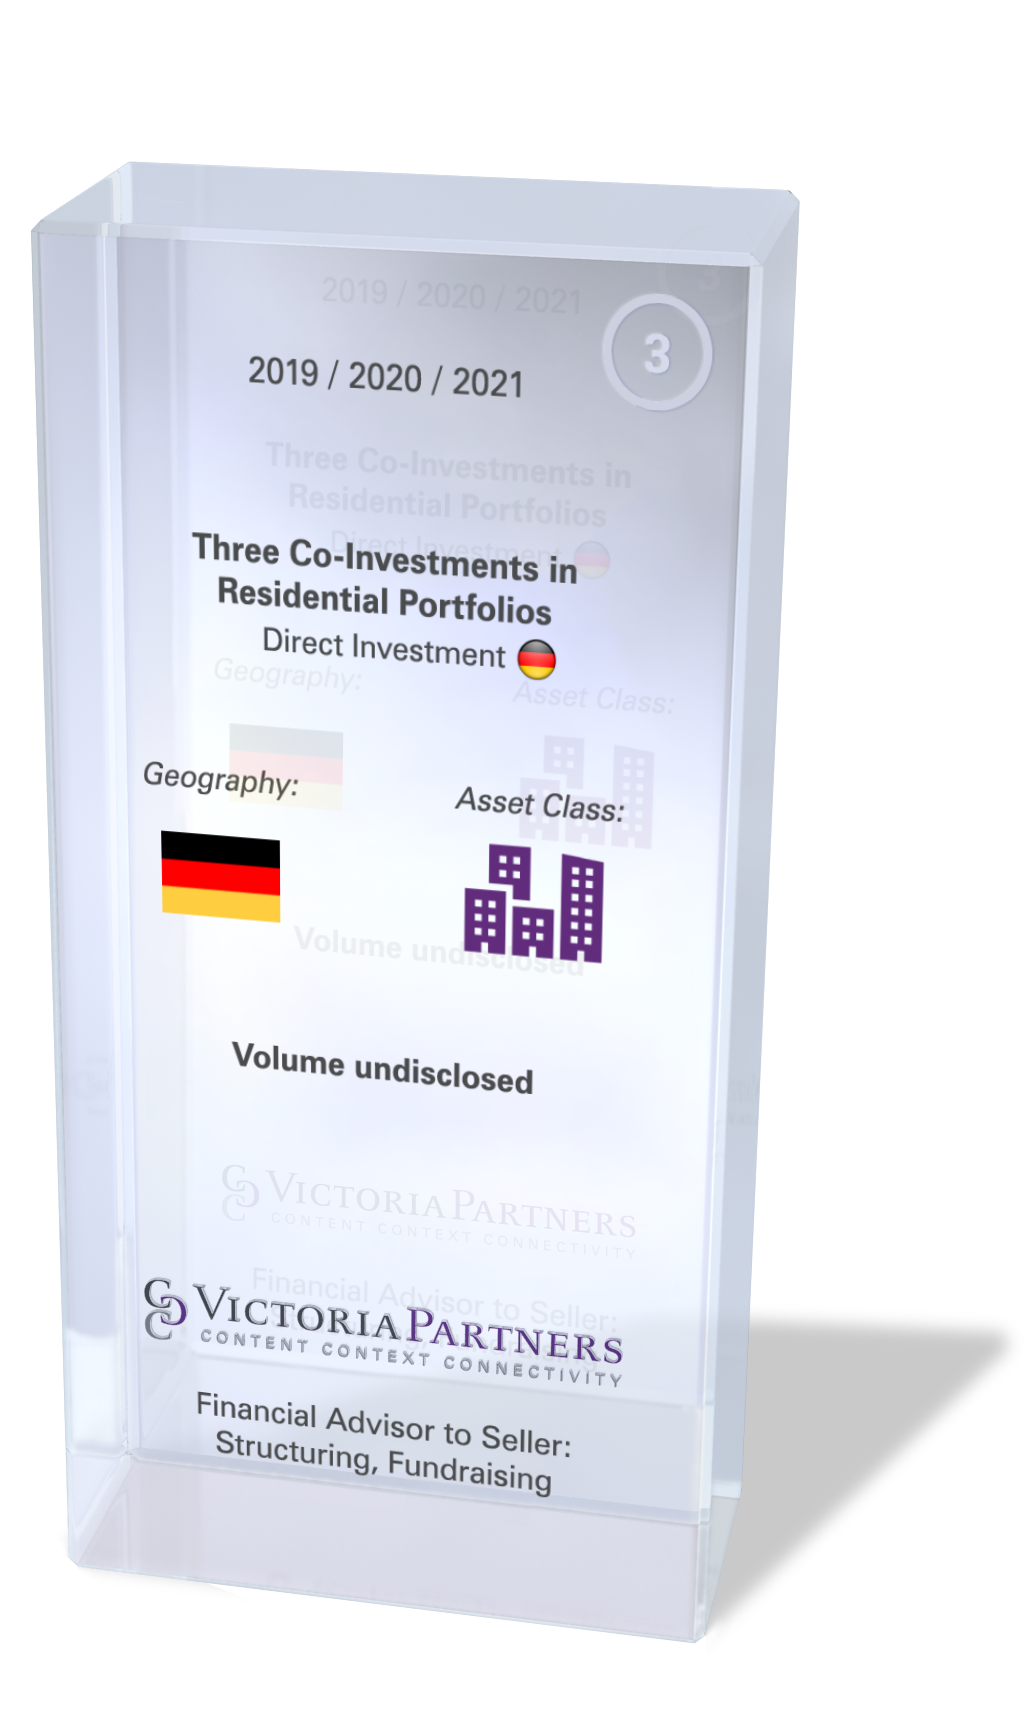 VICTORIAPARTNERS - Financial Advisor to Seller: Structuring, Fundraising in Deutschland- 2019/2020/2021